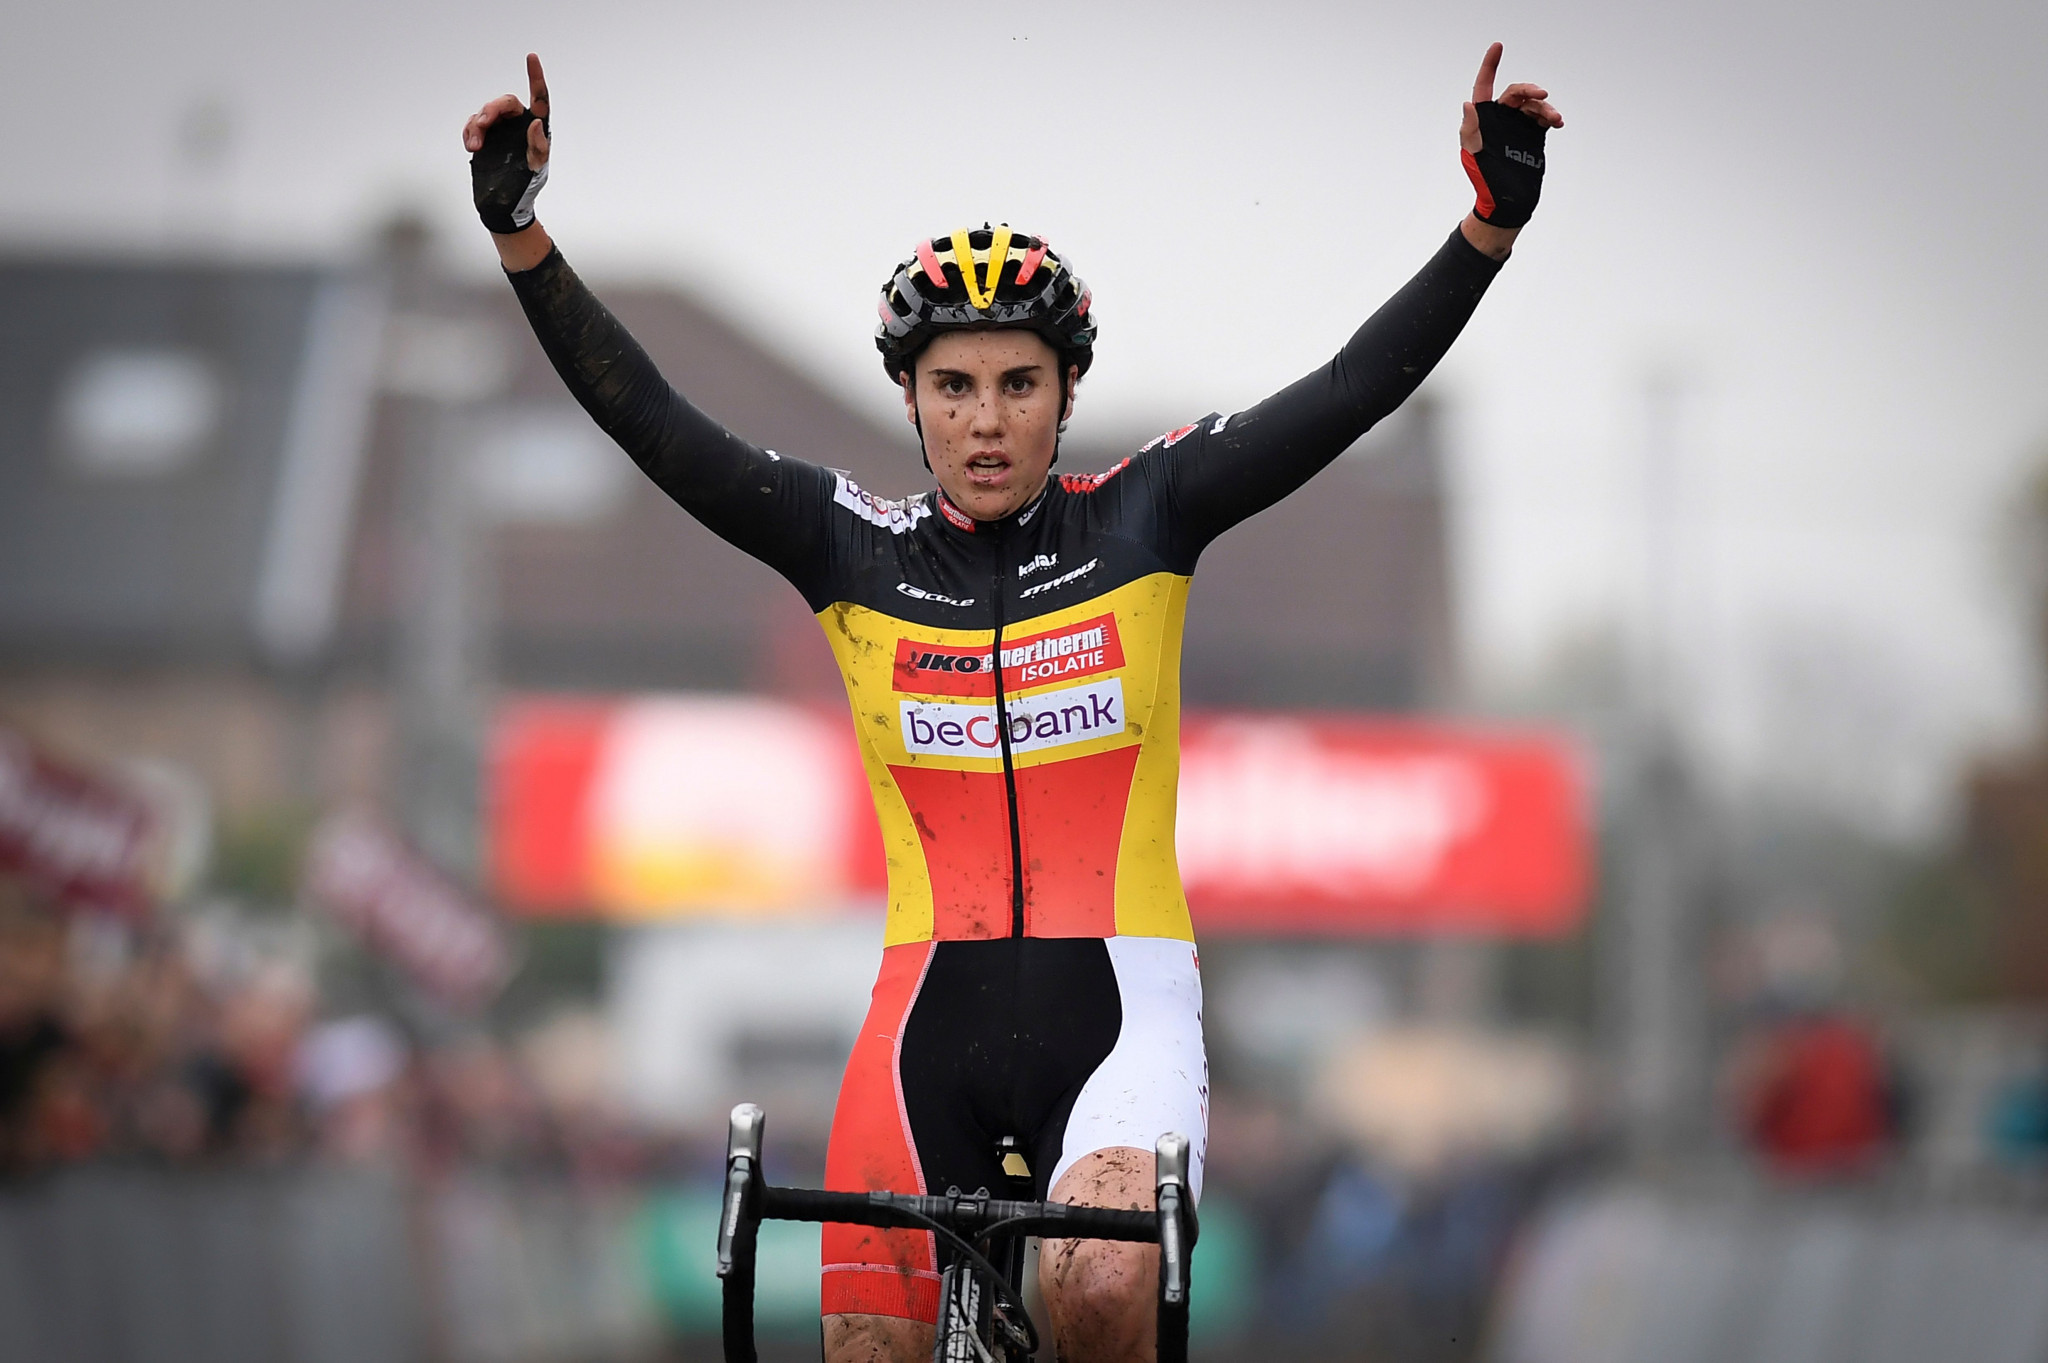 Sanne Cant will aim to continue her good World Cup form ©Getty Images